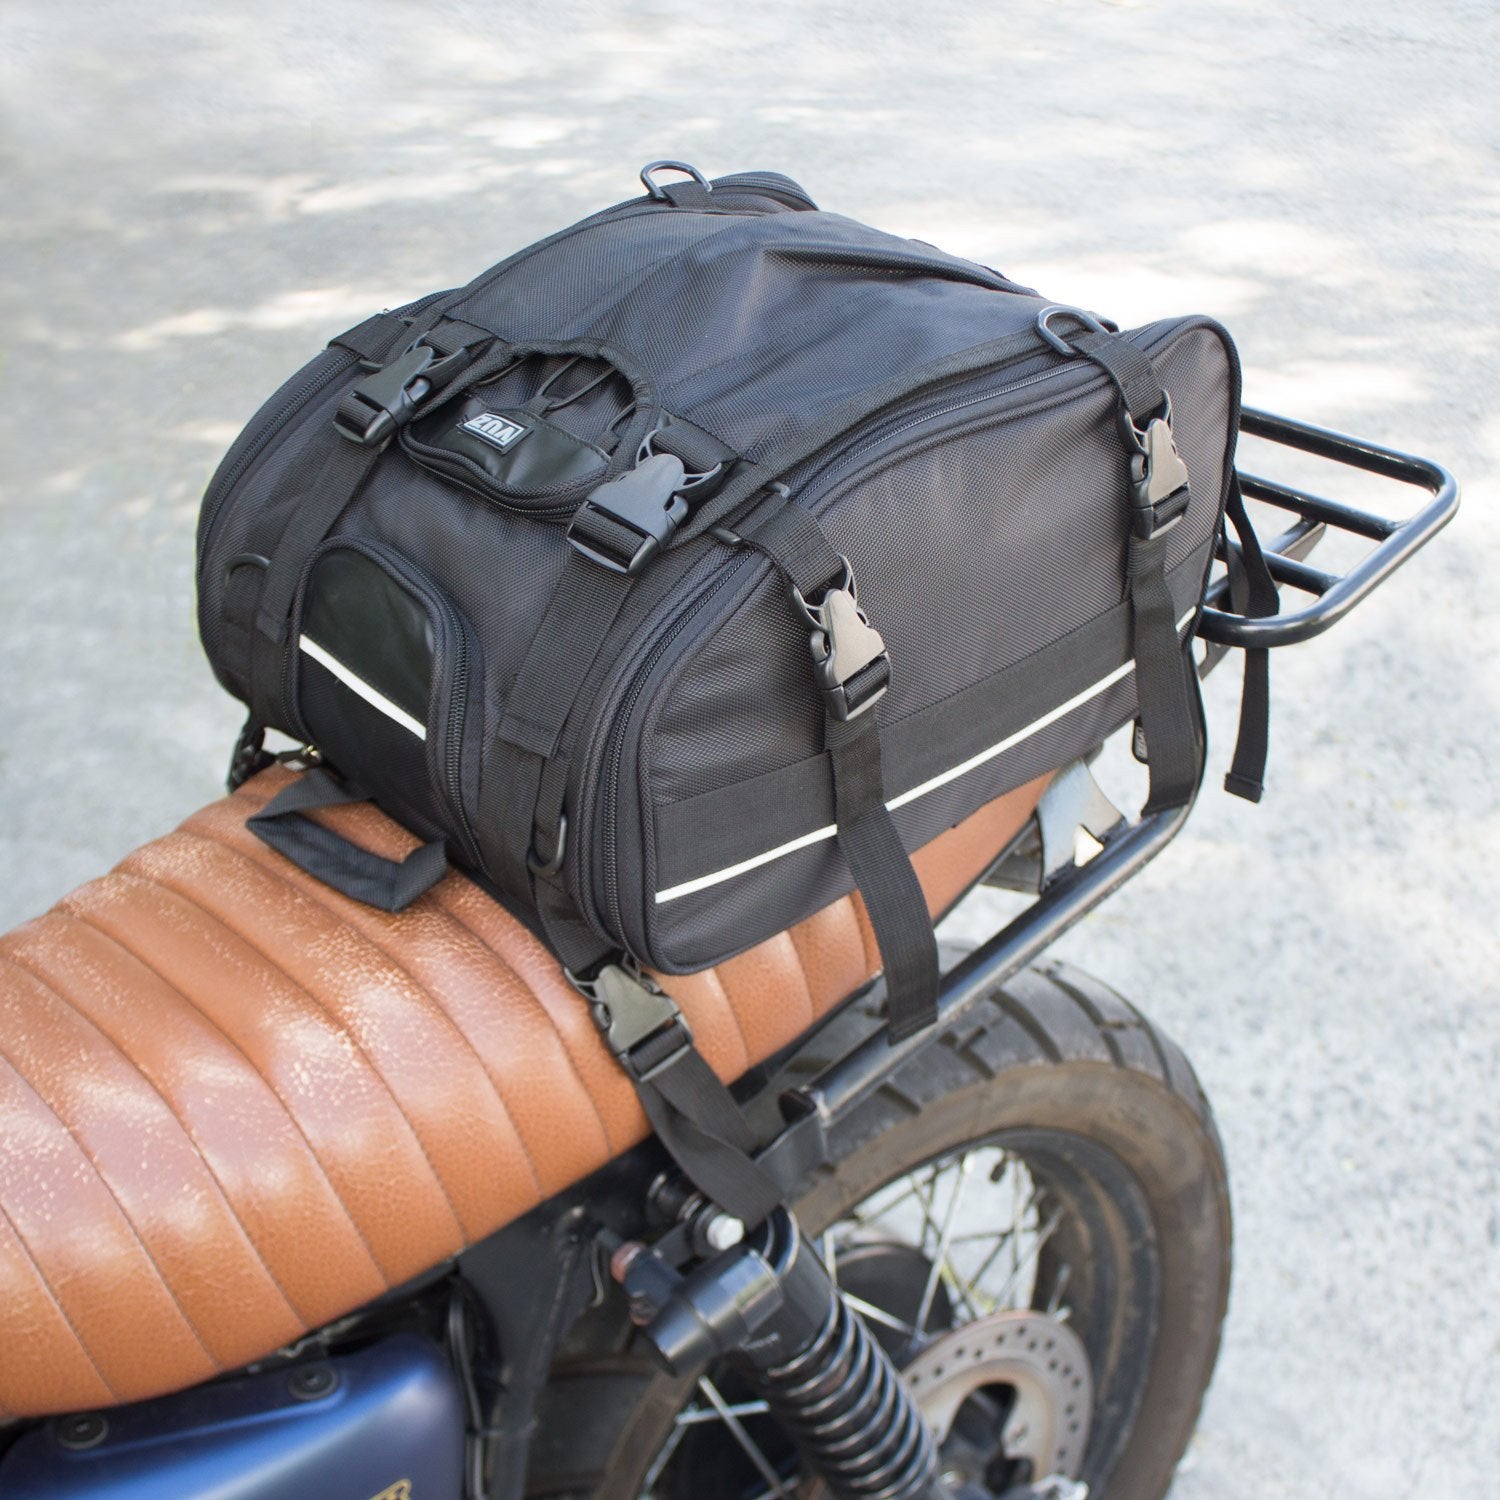 Motorcycle Tail Bags  Waterproof, Soft, Small 